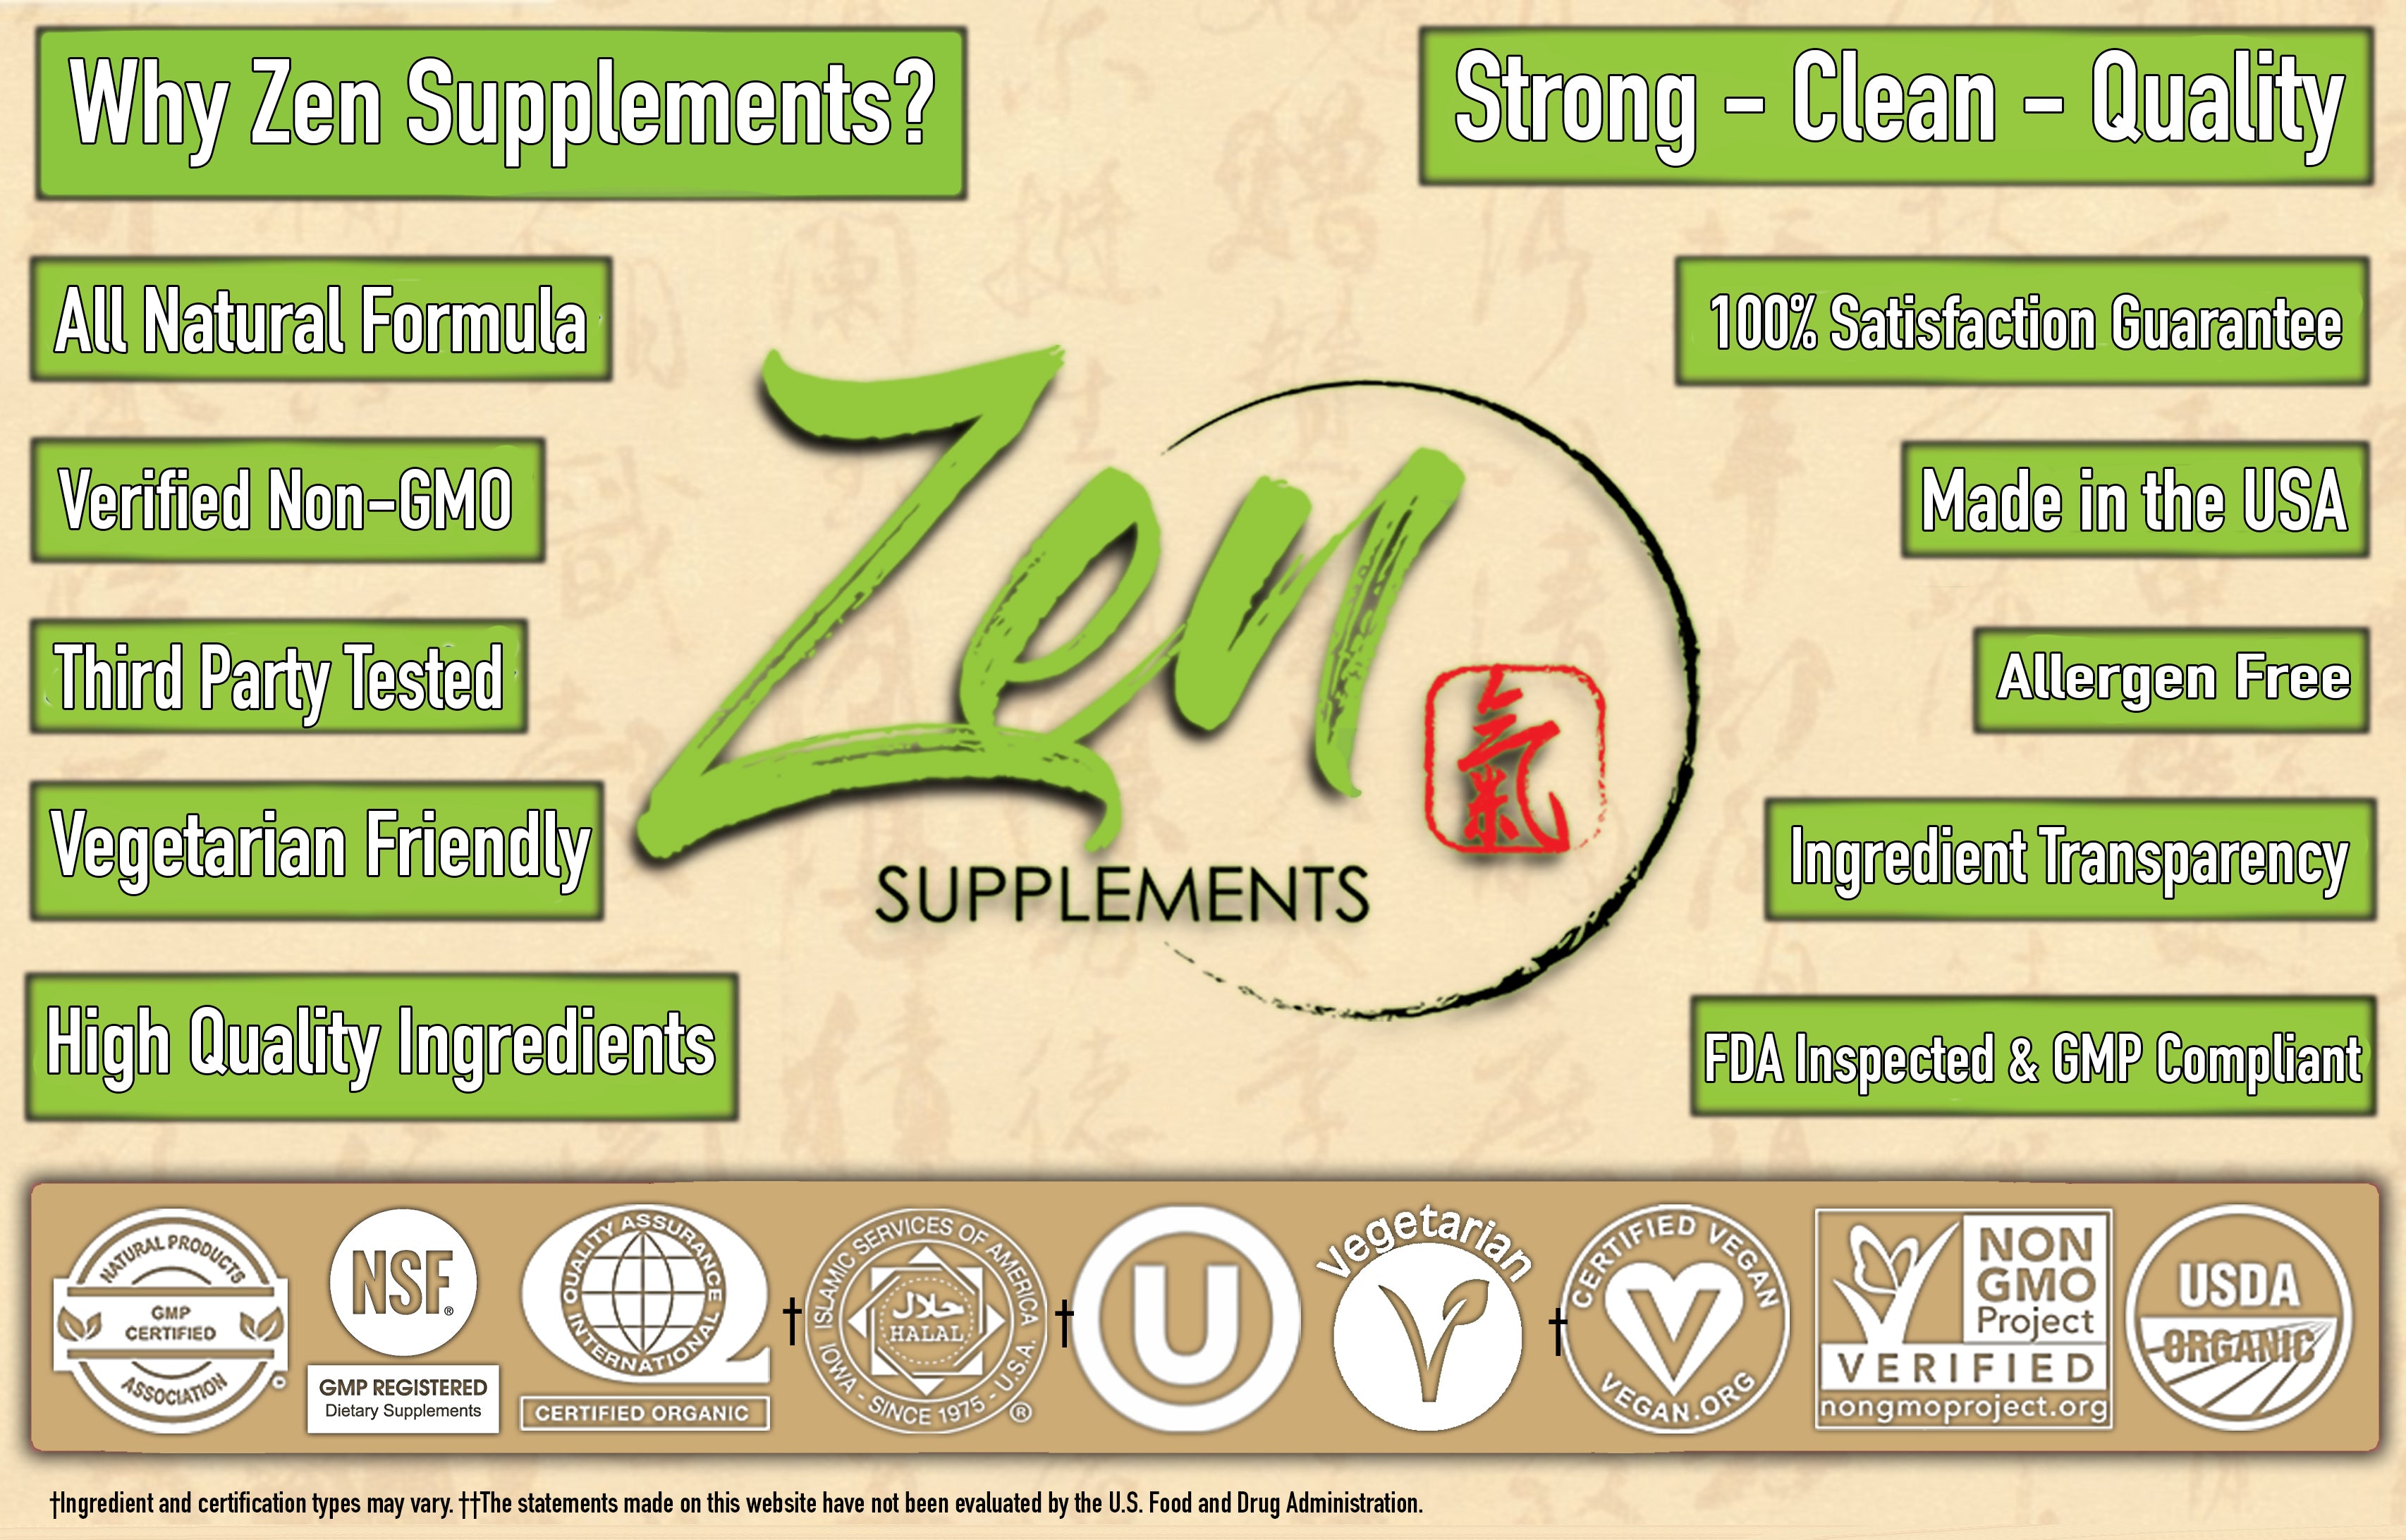 Zen Supplements - Milk Thistle Extract-Plus 175 Mg - Promotes Healthy Liver Function, Liver Health & Supports The Body’s Natural Cleansing & Detoxification Pathways 120-Caps